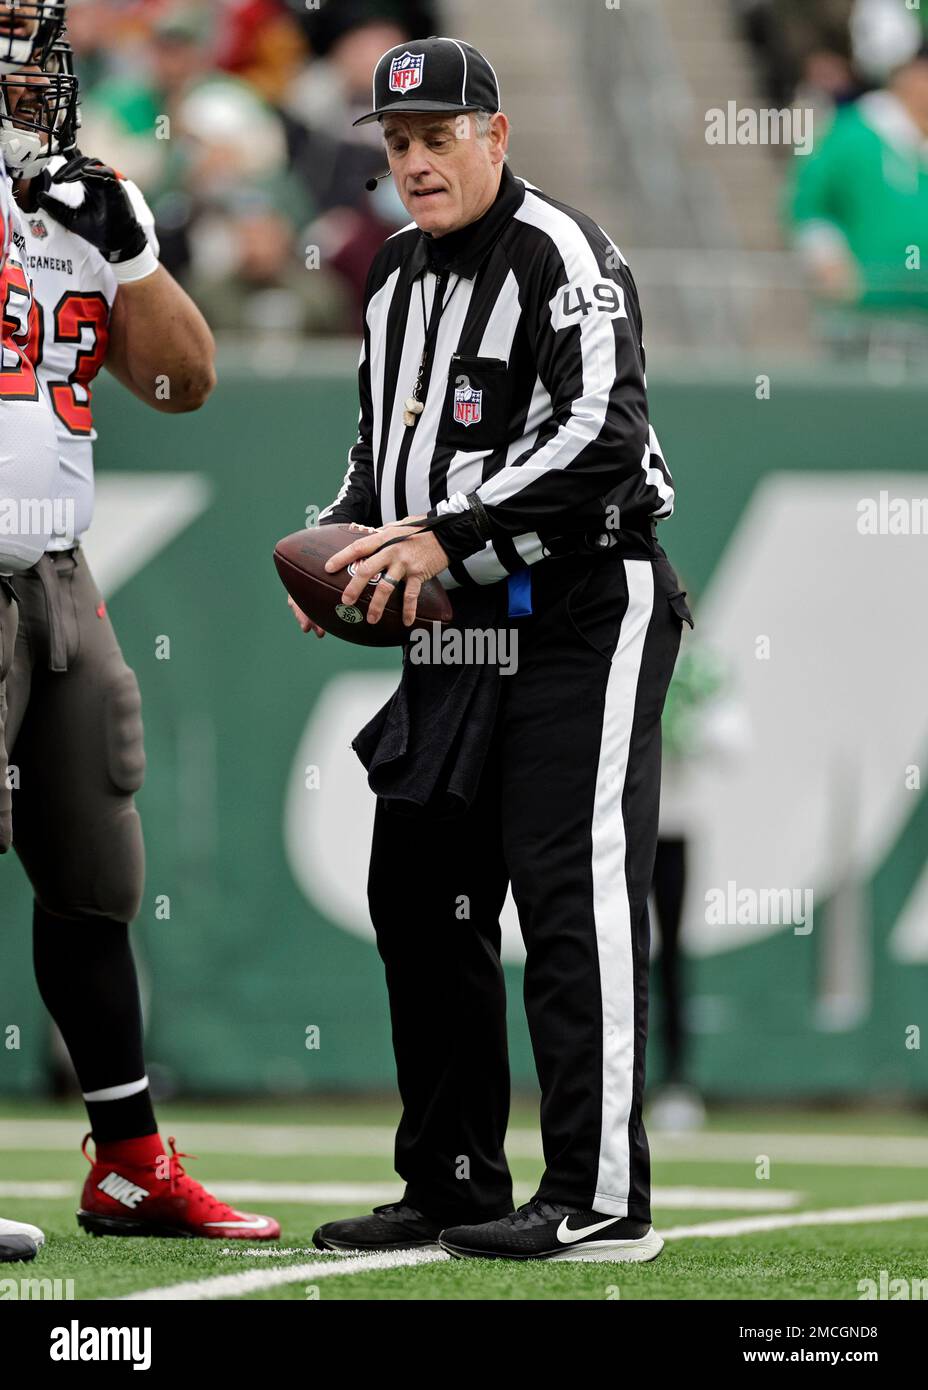 Featured image for “Pima County Sports Hall of Famer Rich Hall on what it’s like to officiate in the NFL”